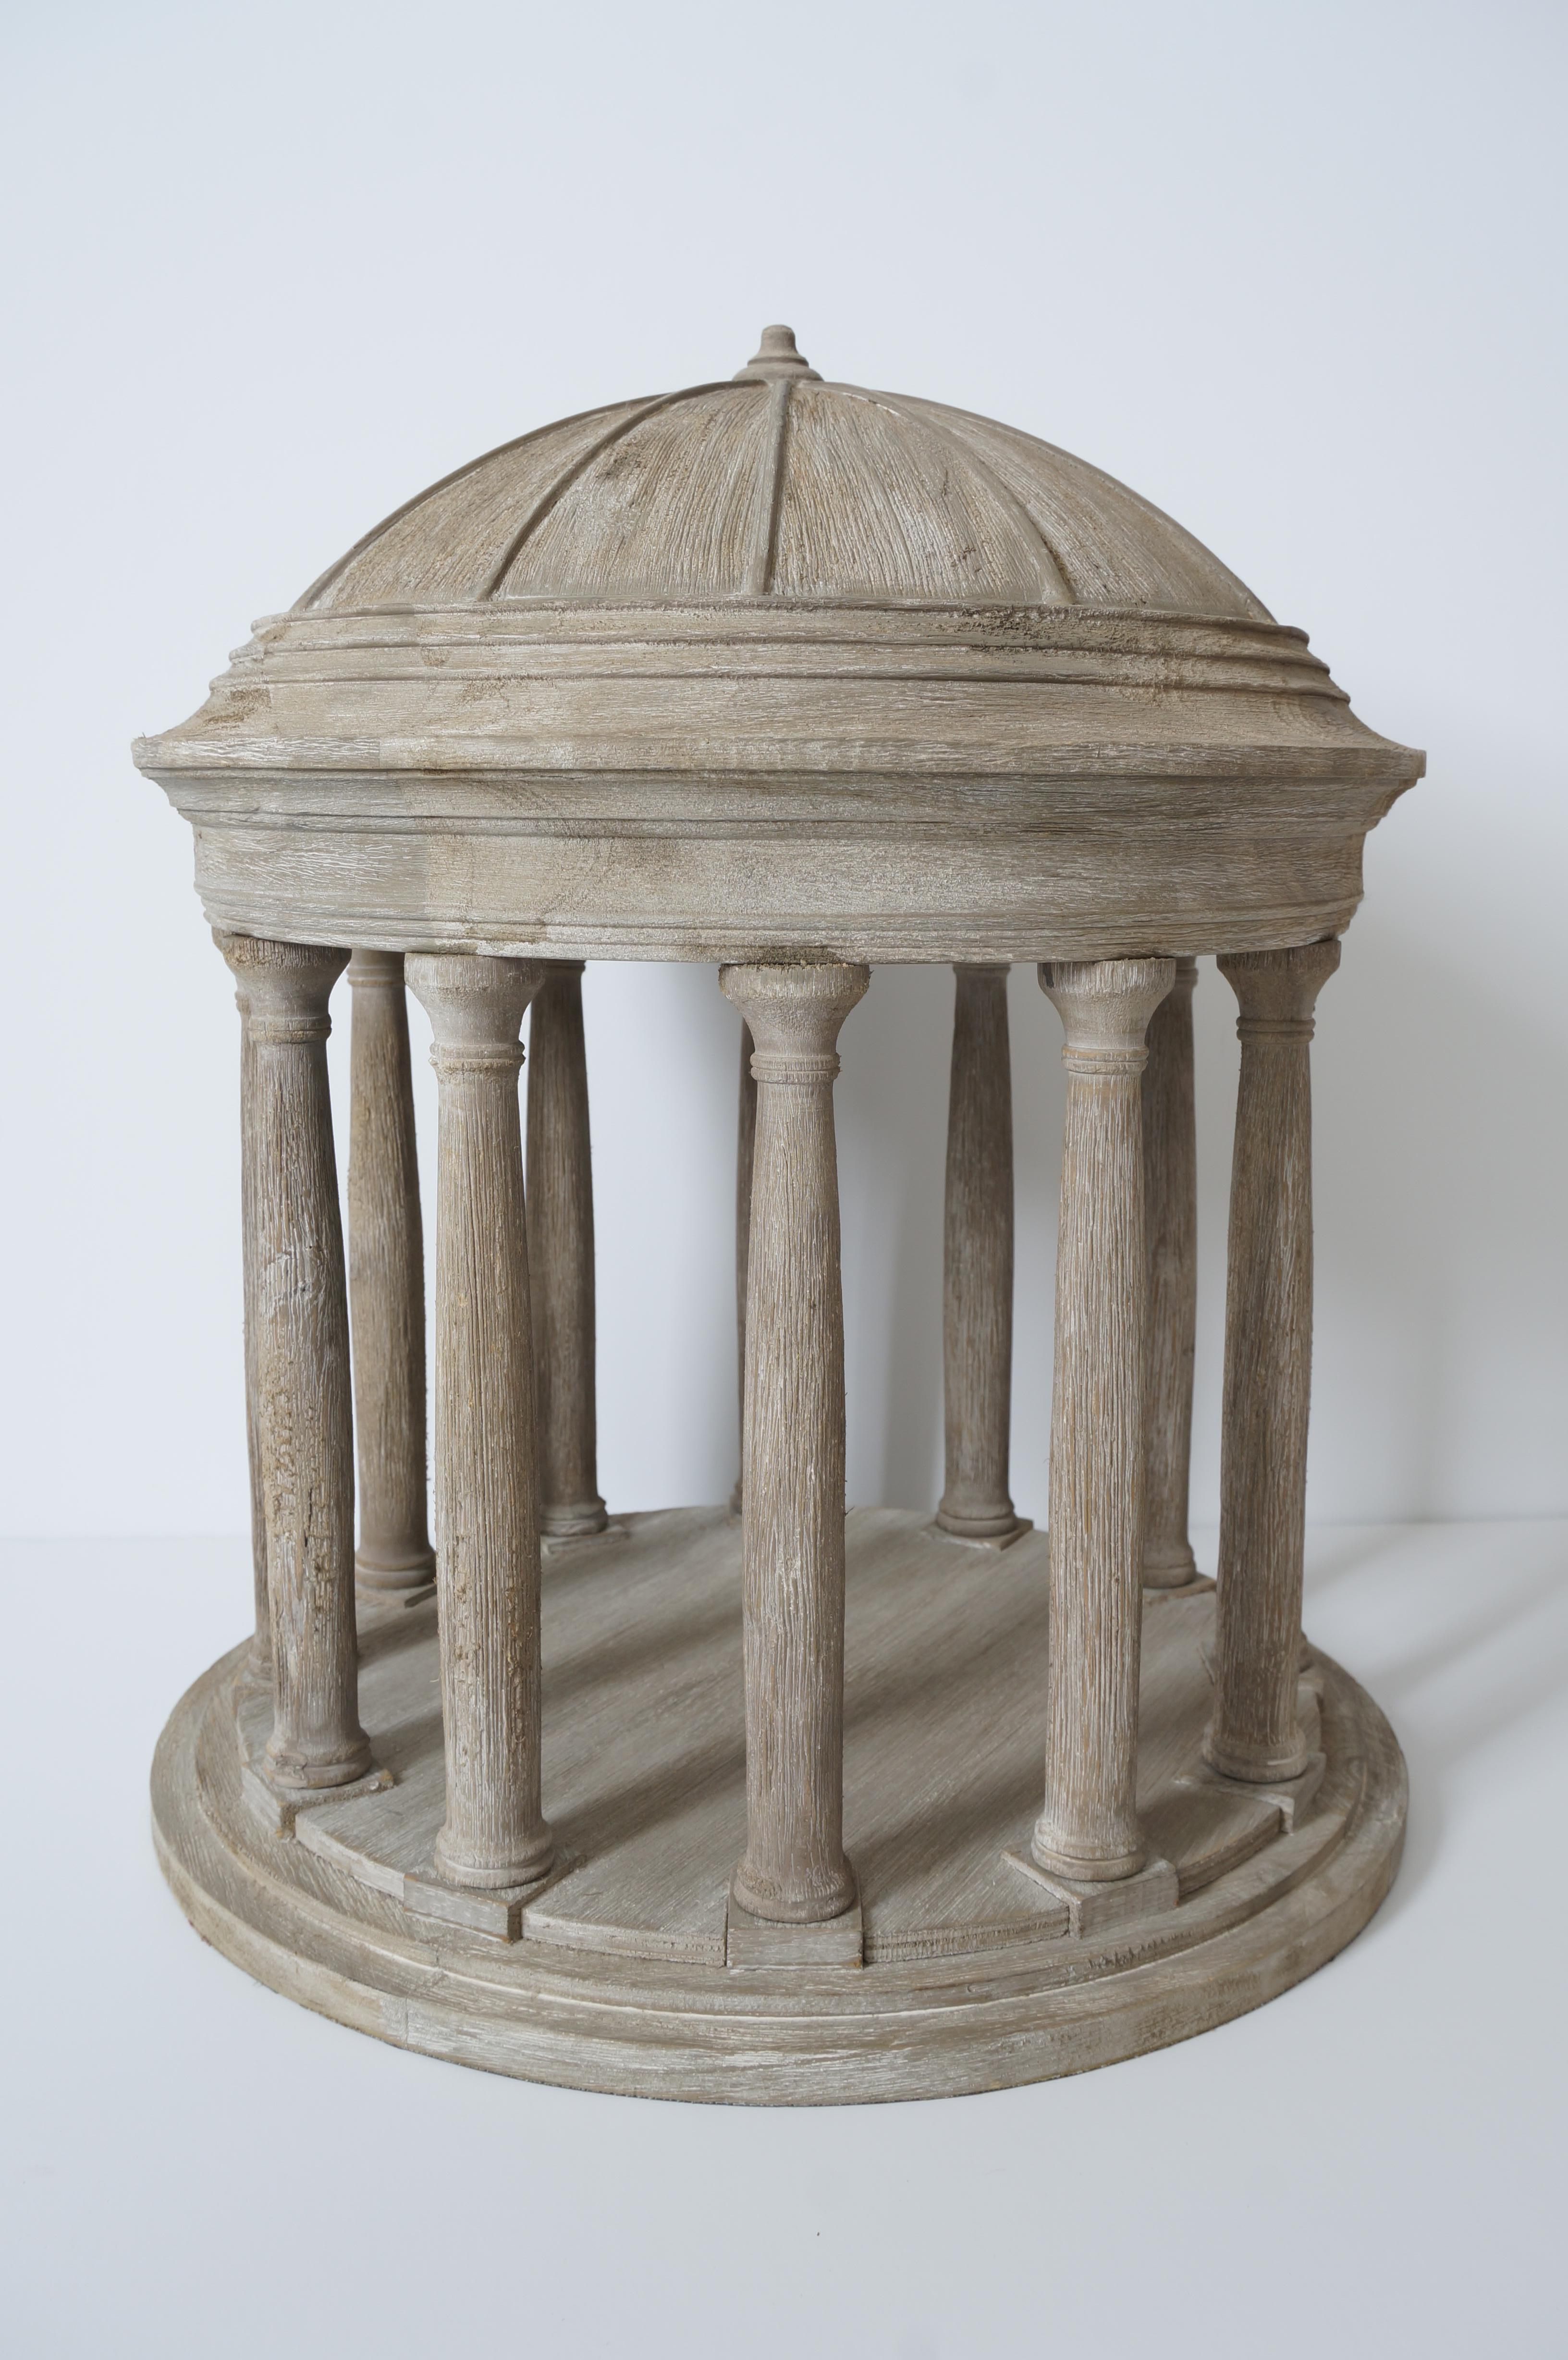 This stylish architectural model dates to the 1980s and is a stylized model of a Palladian temple/gazebo that the English country house would have had on their properties. The piece has a lite white/wash over a wooden frame and it is attributed to